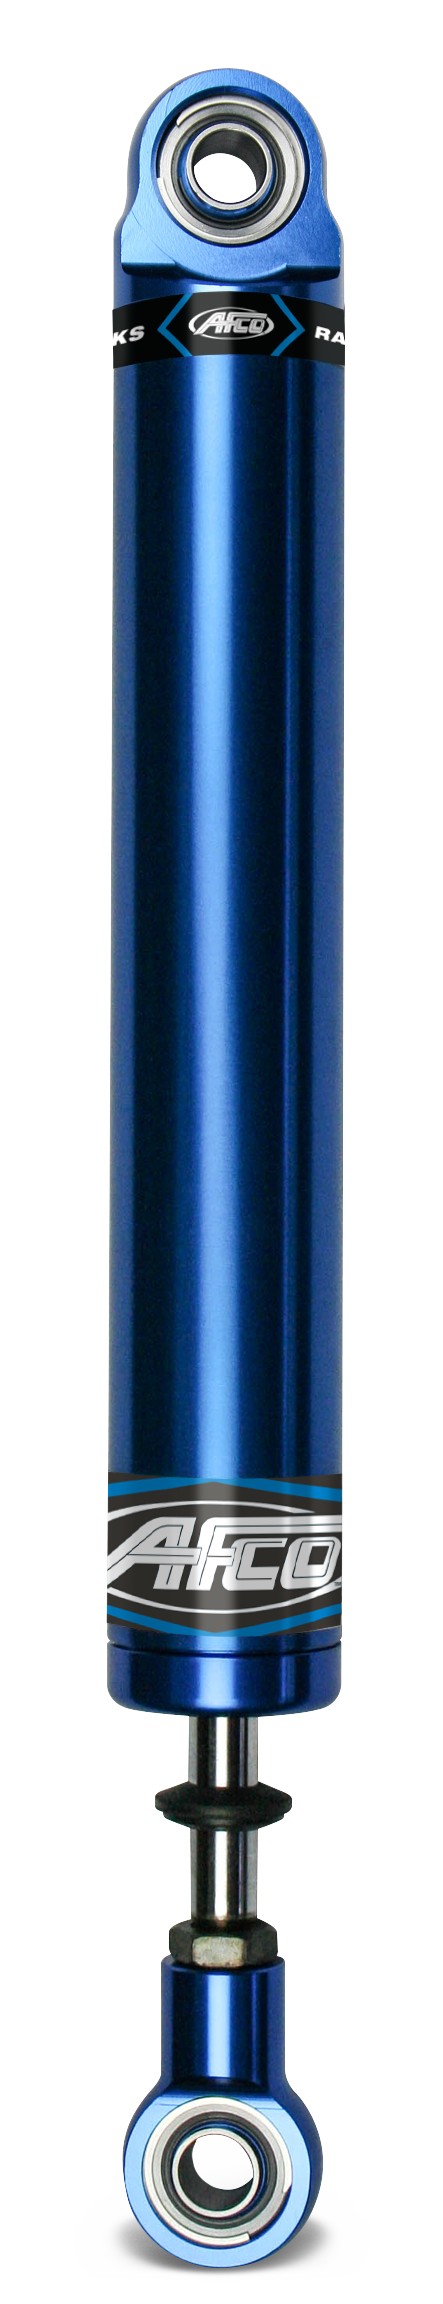 Aluminum Shock Twin Tube 16 Series Small Body 6 Inch Comp 2/Reb 5 Smooth